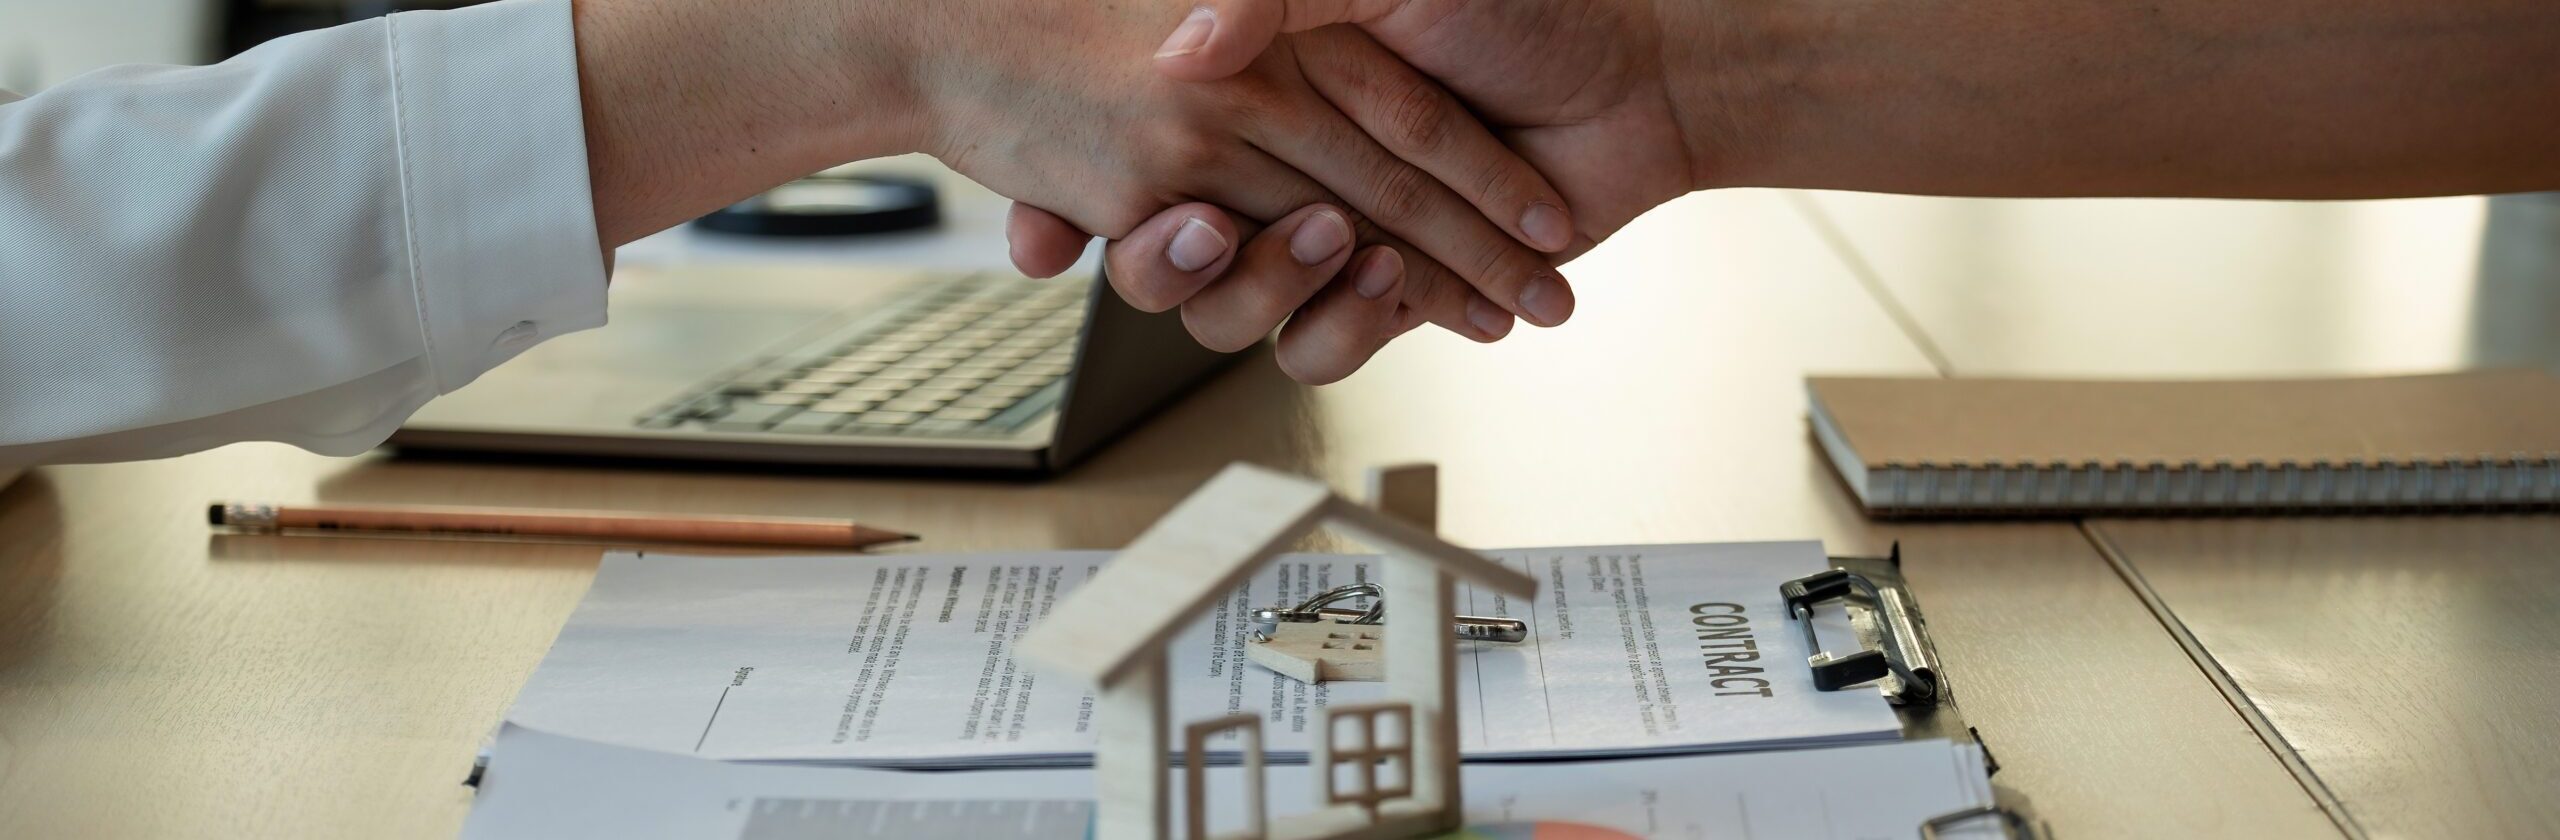 Handshake a successful real estate transaction in an office. Business people shake hands after signing a house purchase agreement.